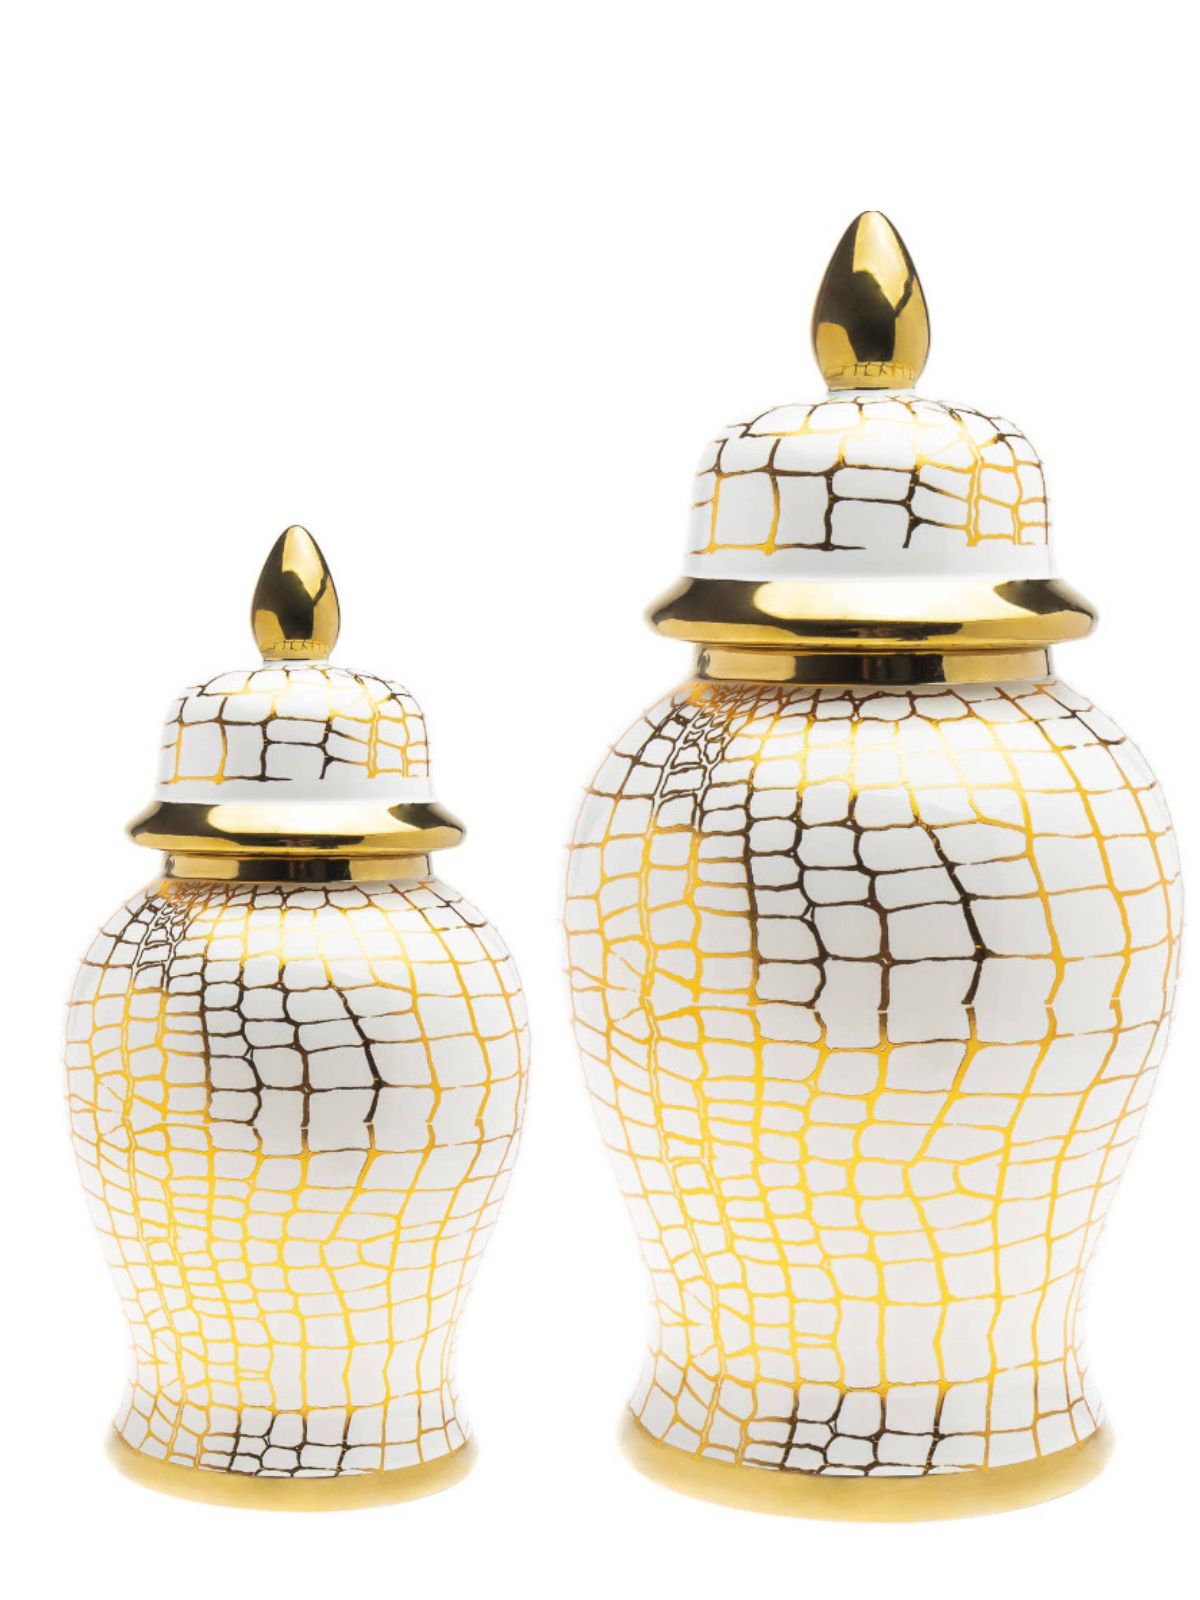 Snake Print Porcelain Ginger Jar with an elegant gold-tone rim and base. Available in 2 sizes